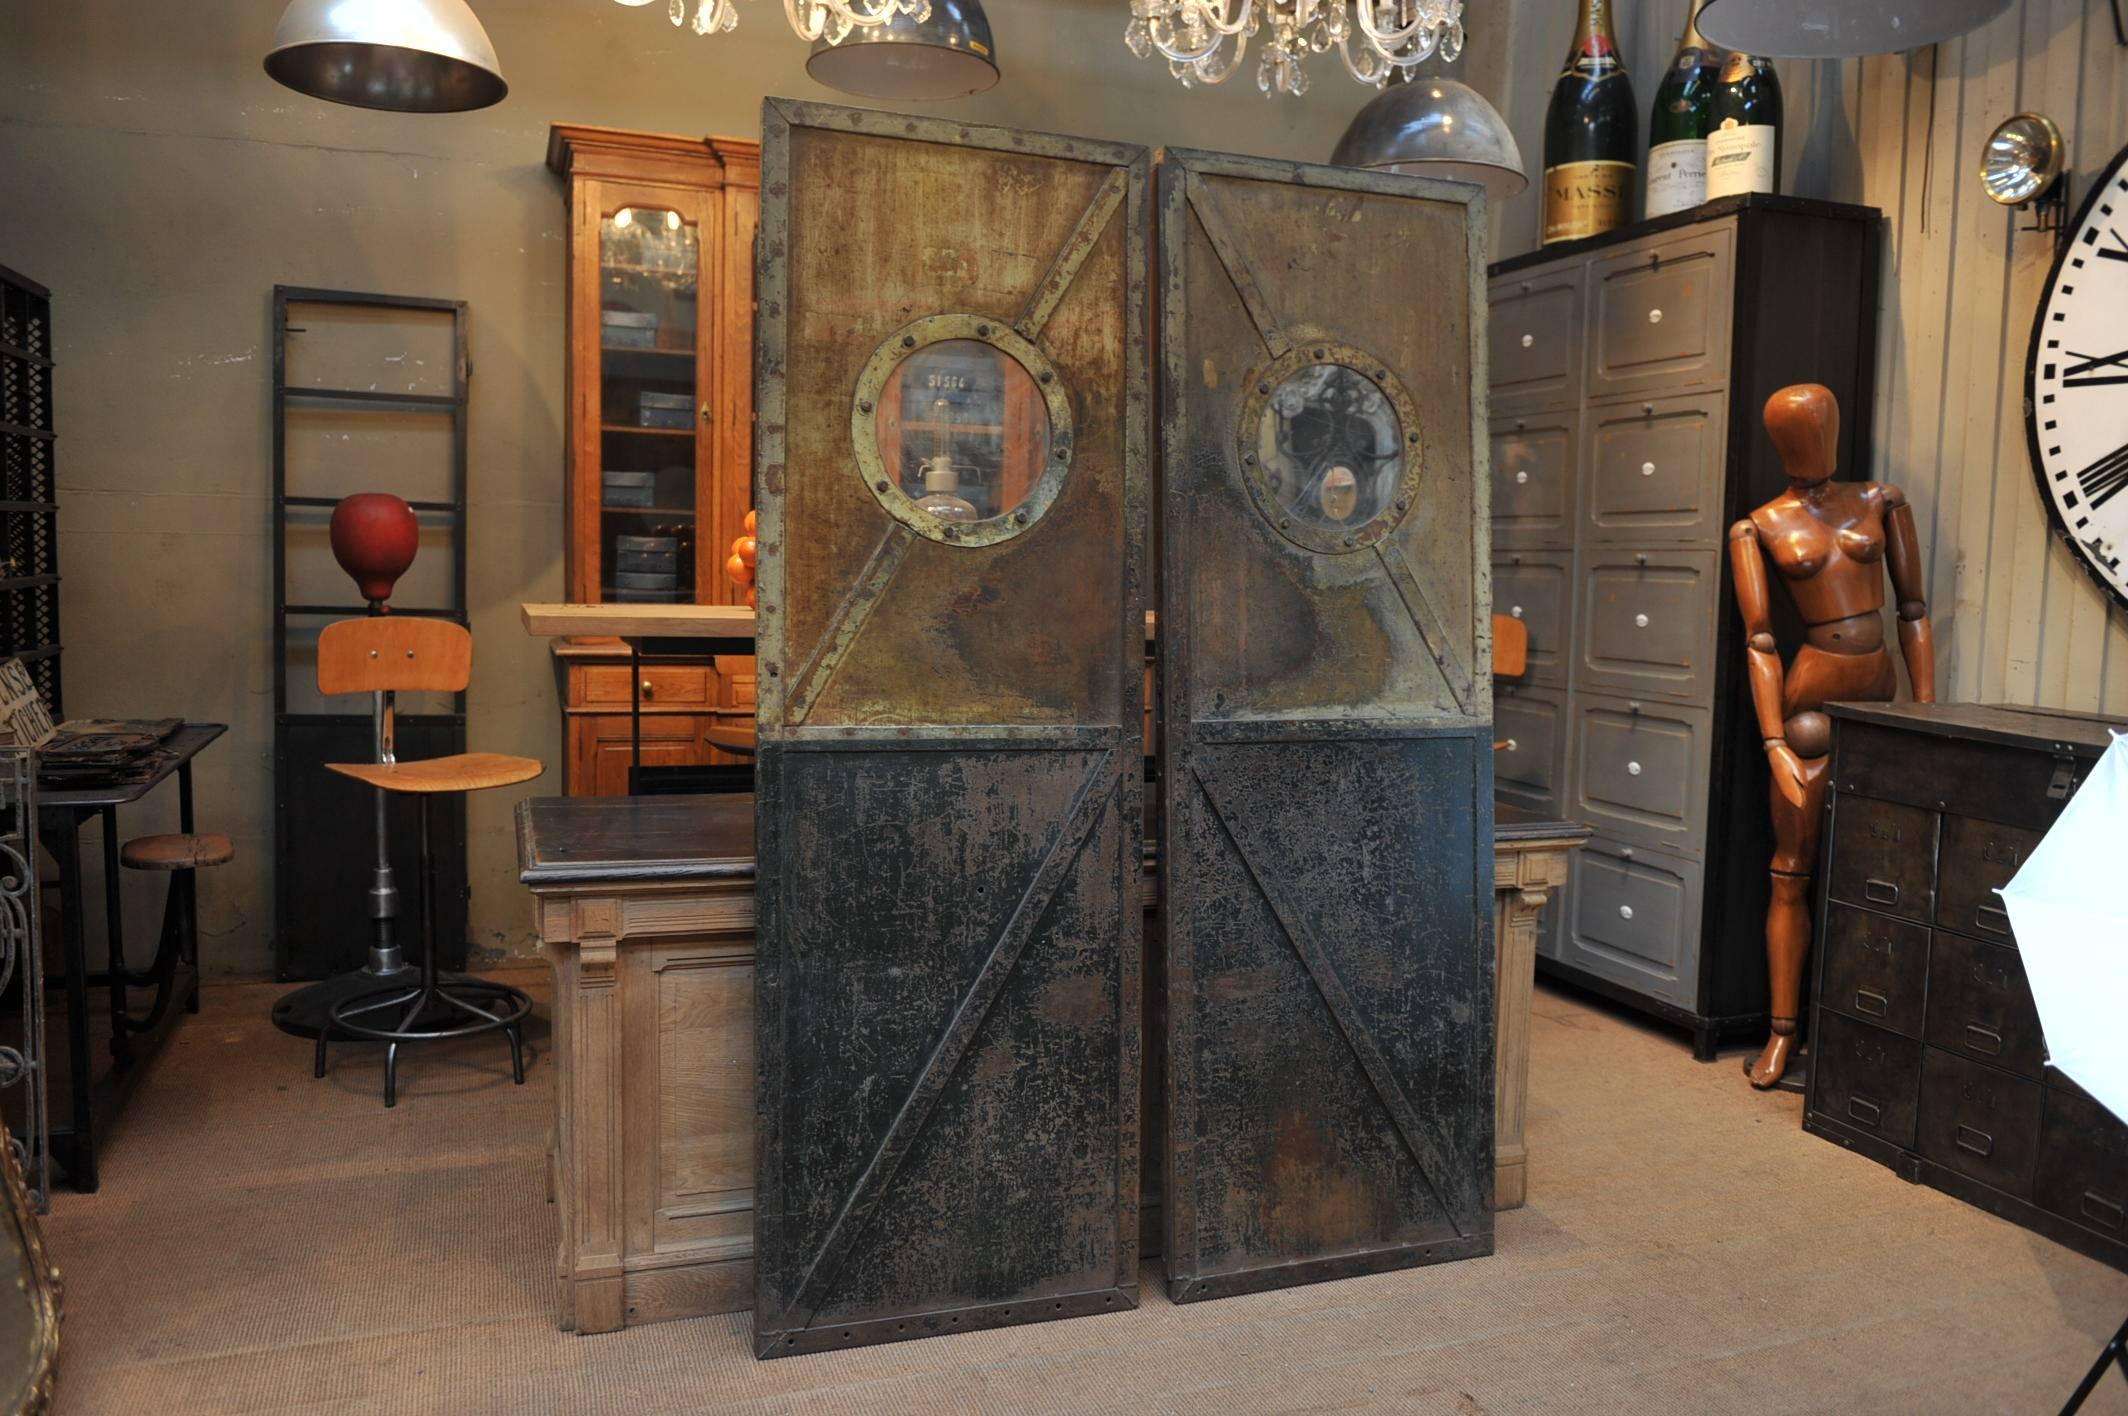 French factory riveted iron pair of doors, 1920s. Original patina waxed finish.
Total width 134 cm, weight 50 kg each.
     